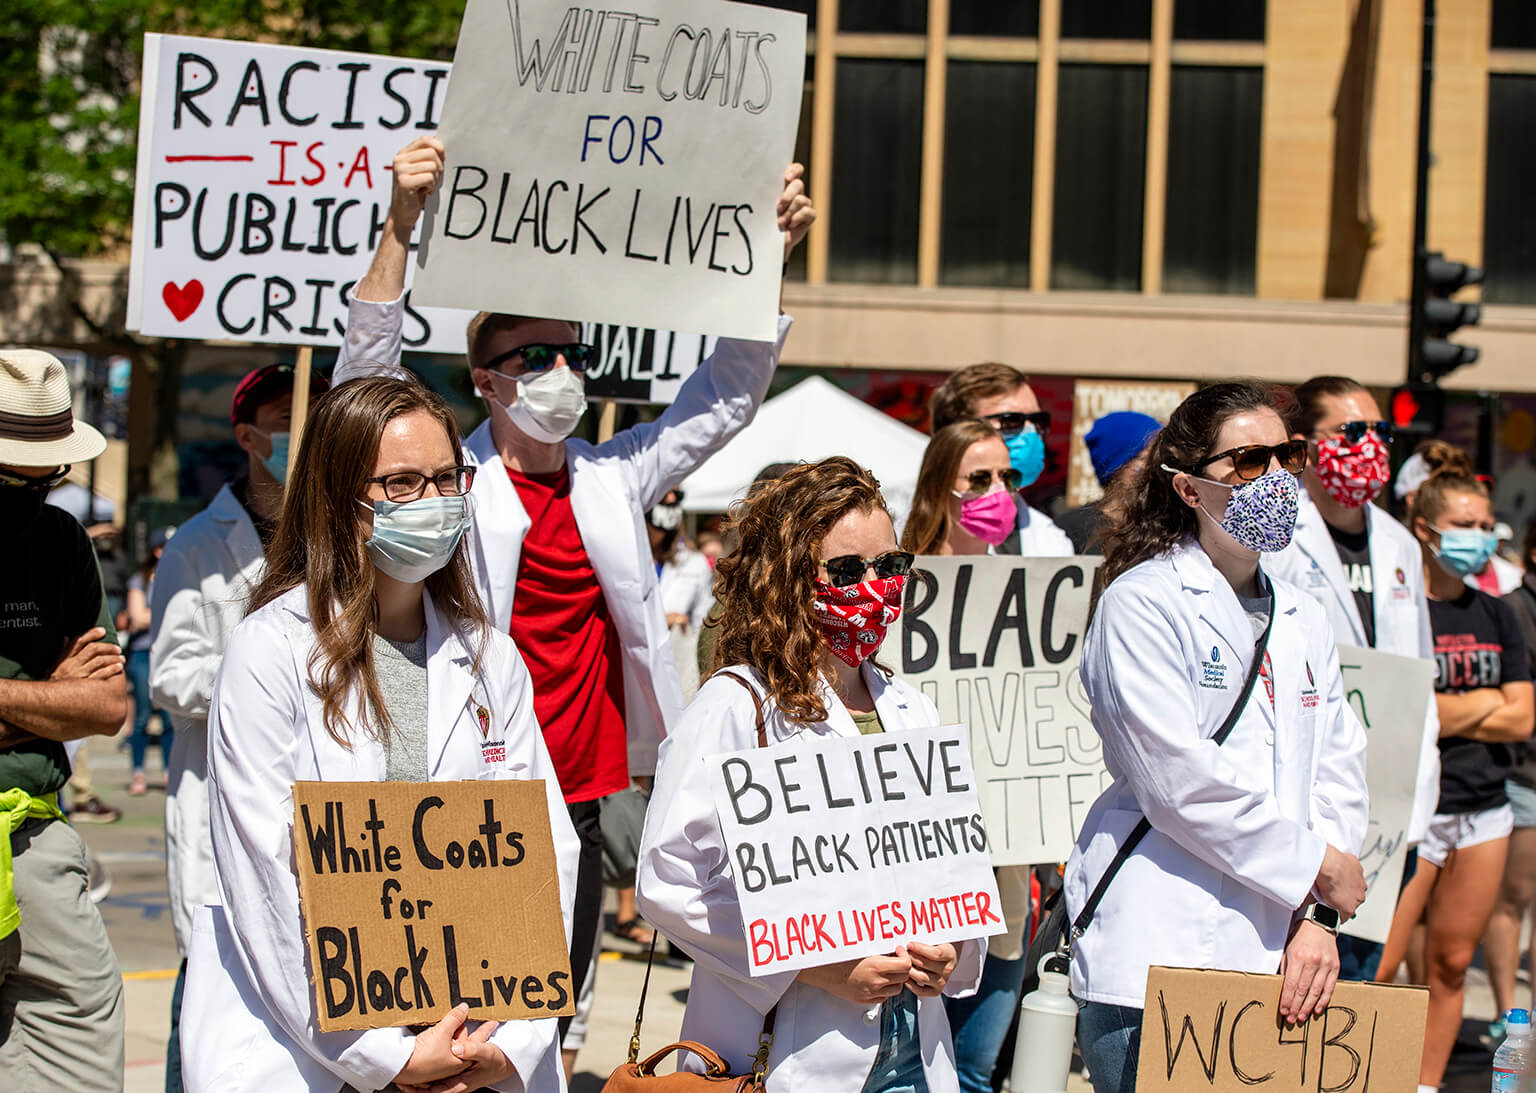 Students holding signs during white coats for black lives march